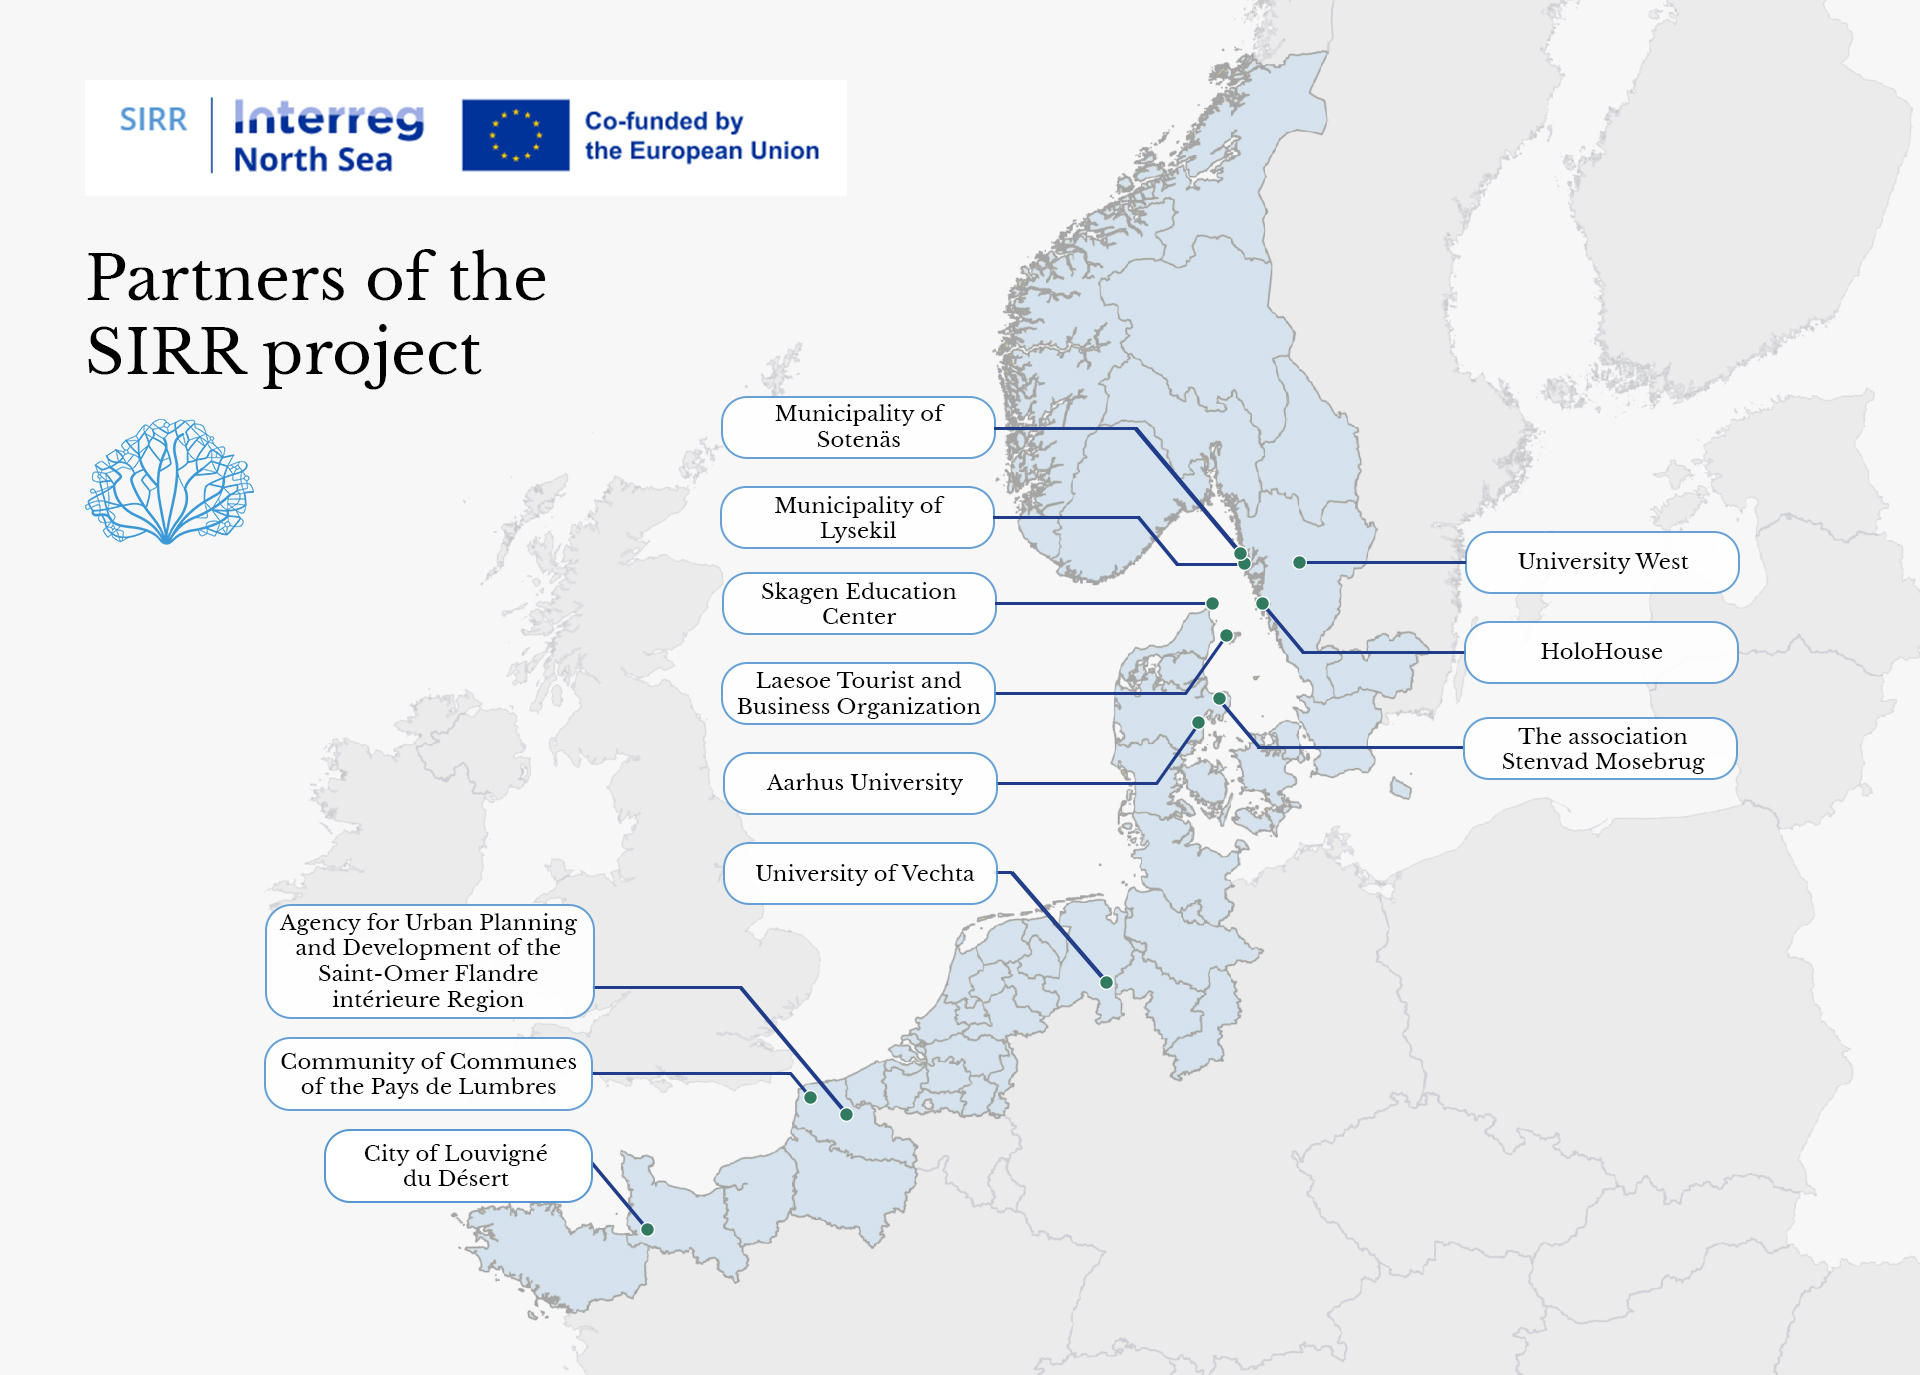 Map of all partners of the SIRR project